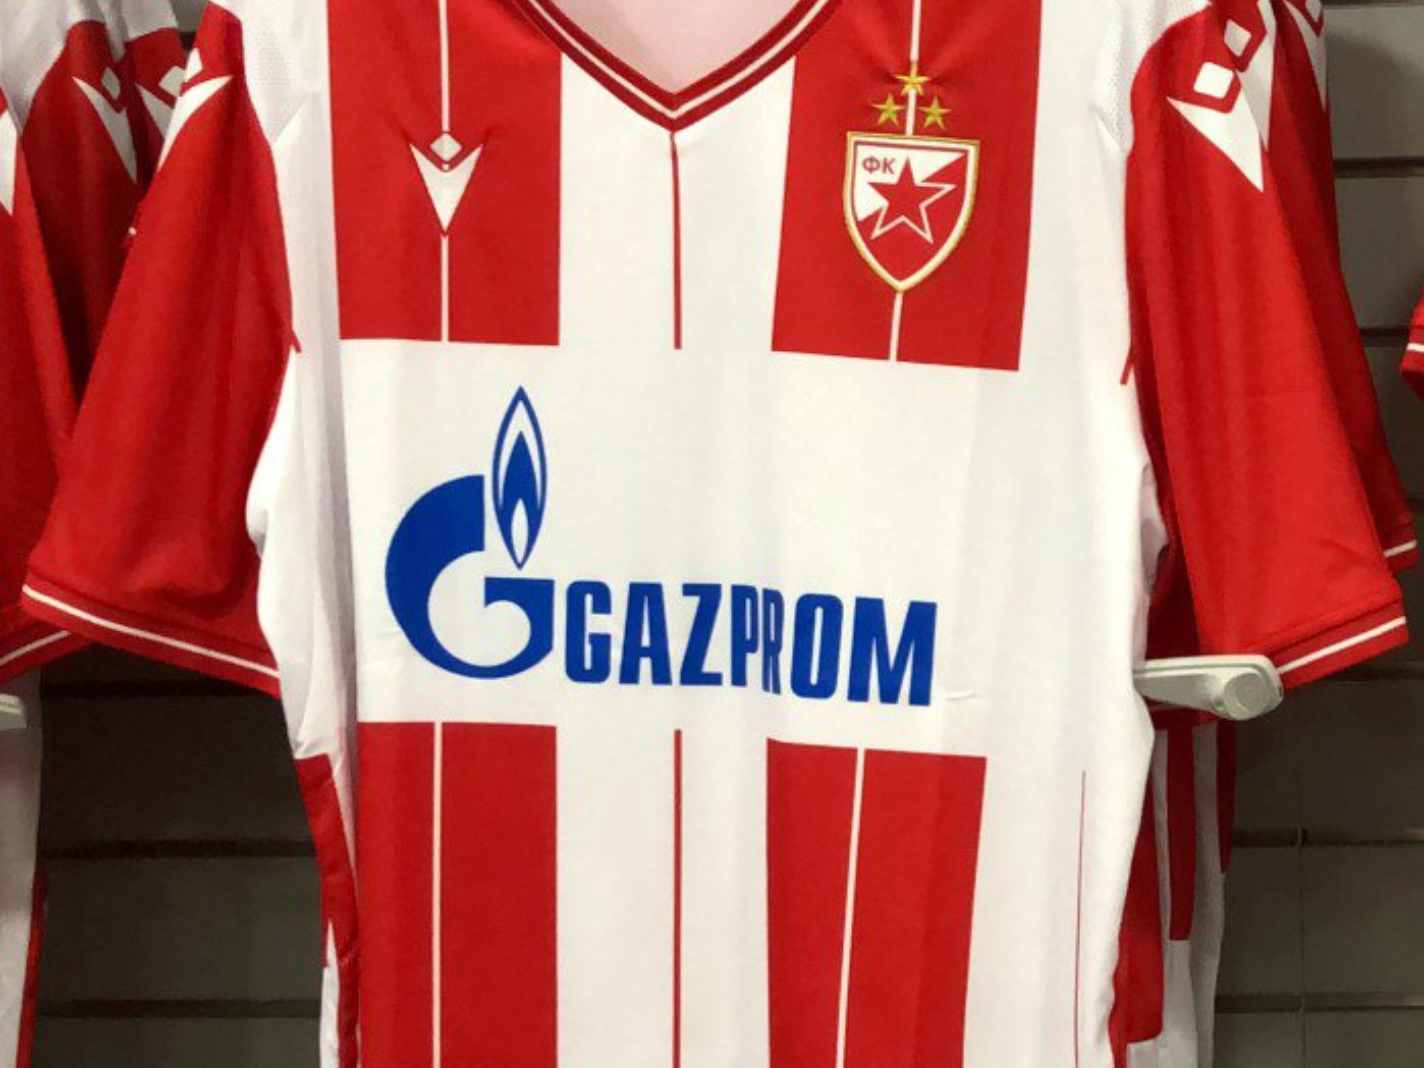 Explaining the Outrage Over Man City Blurring Gazprom Logo from Red Star Belgrade Kits